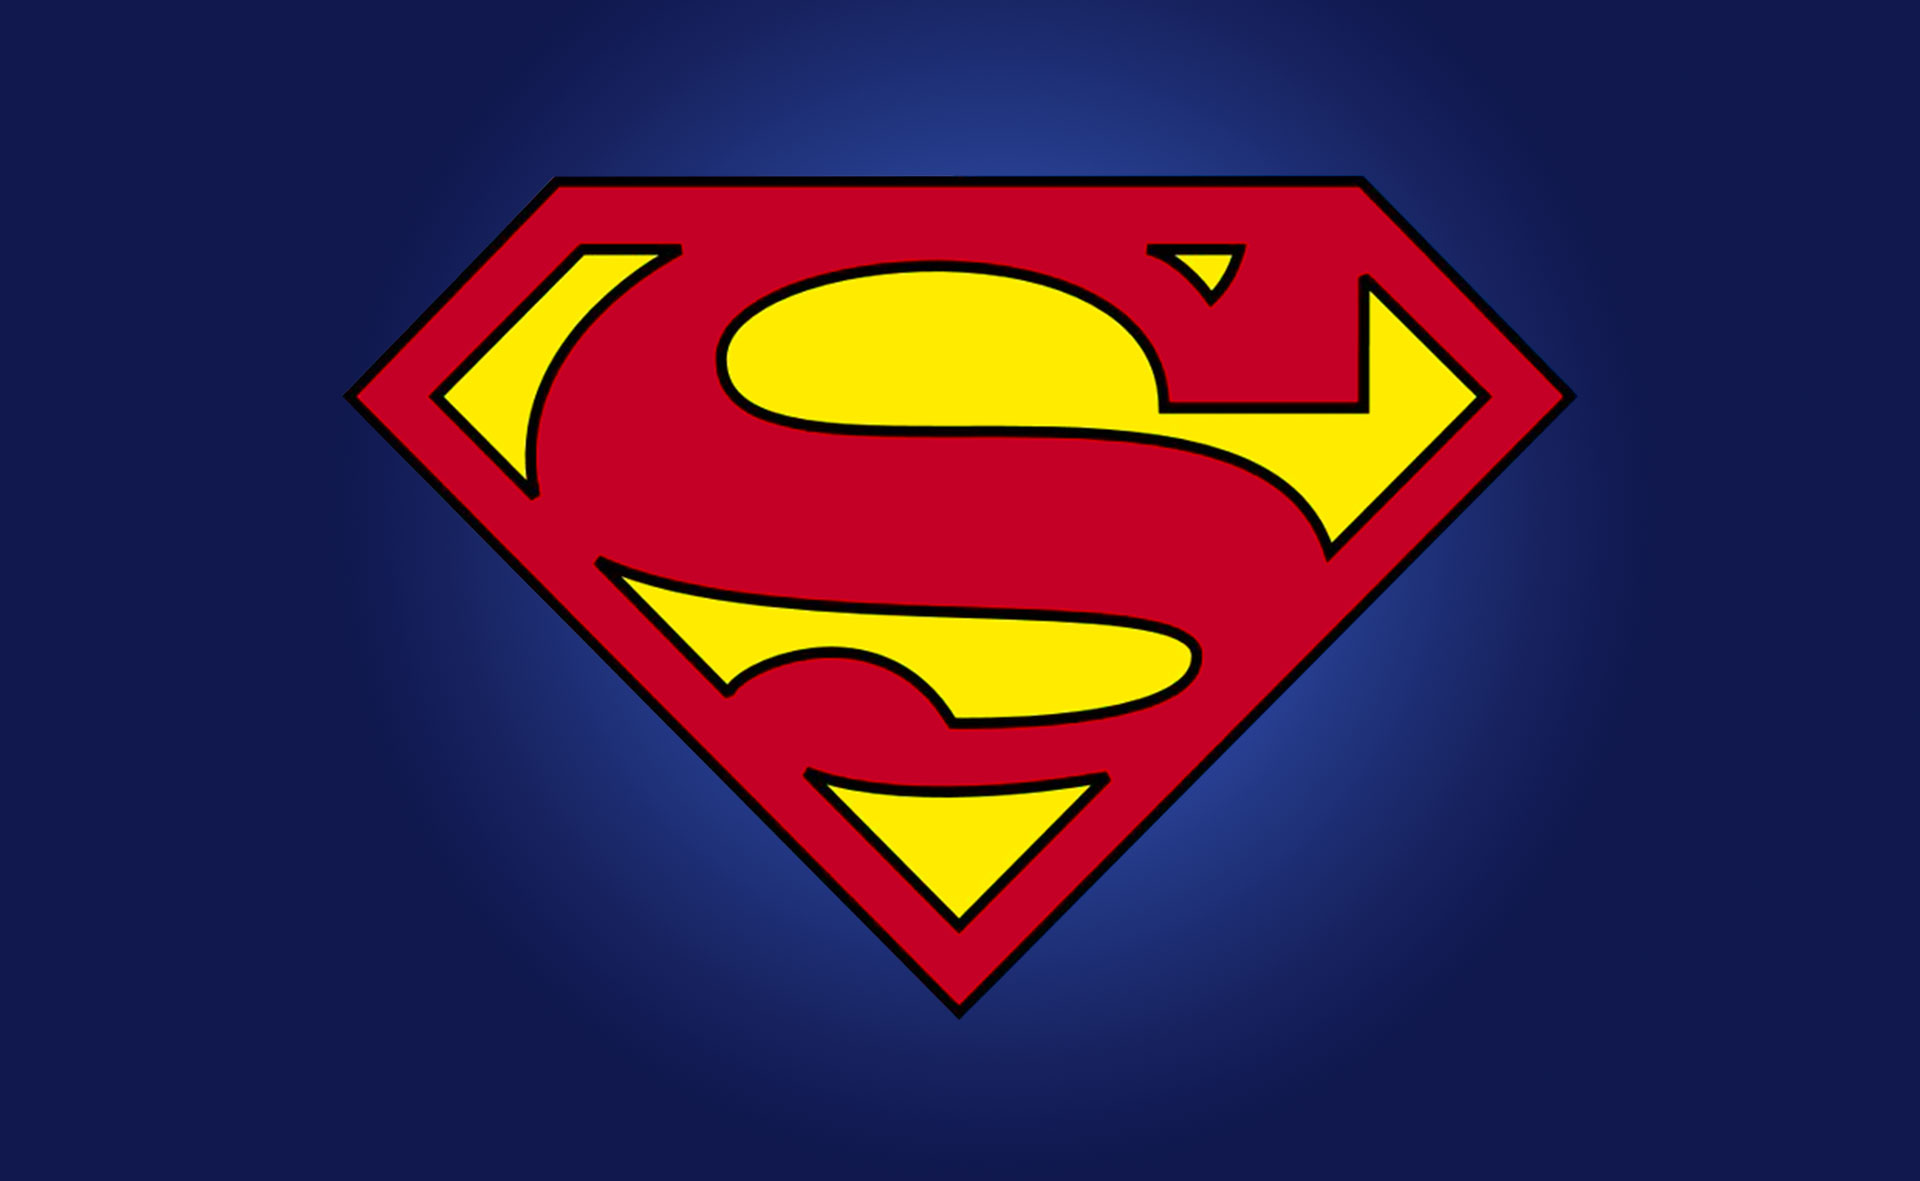 Superman S Logo, Christopher Reeve Movie Era, 1970s and 80s